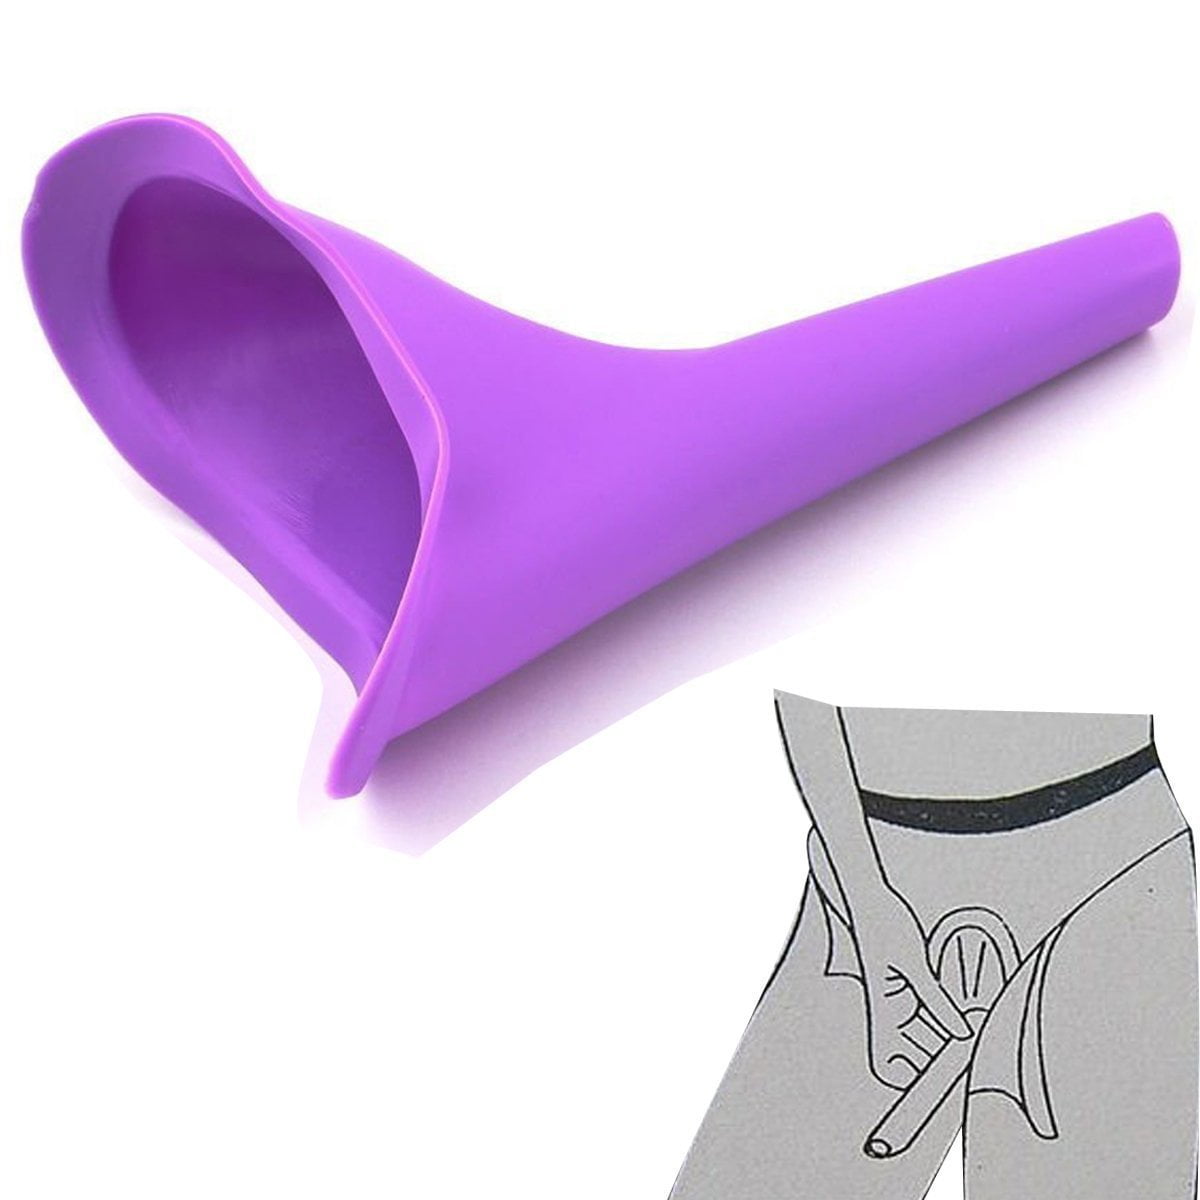 Portable Female Ladies Woman She Urinal Urine Wee Funnel Camping Travel Loo UK 